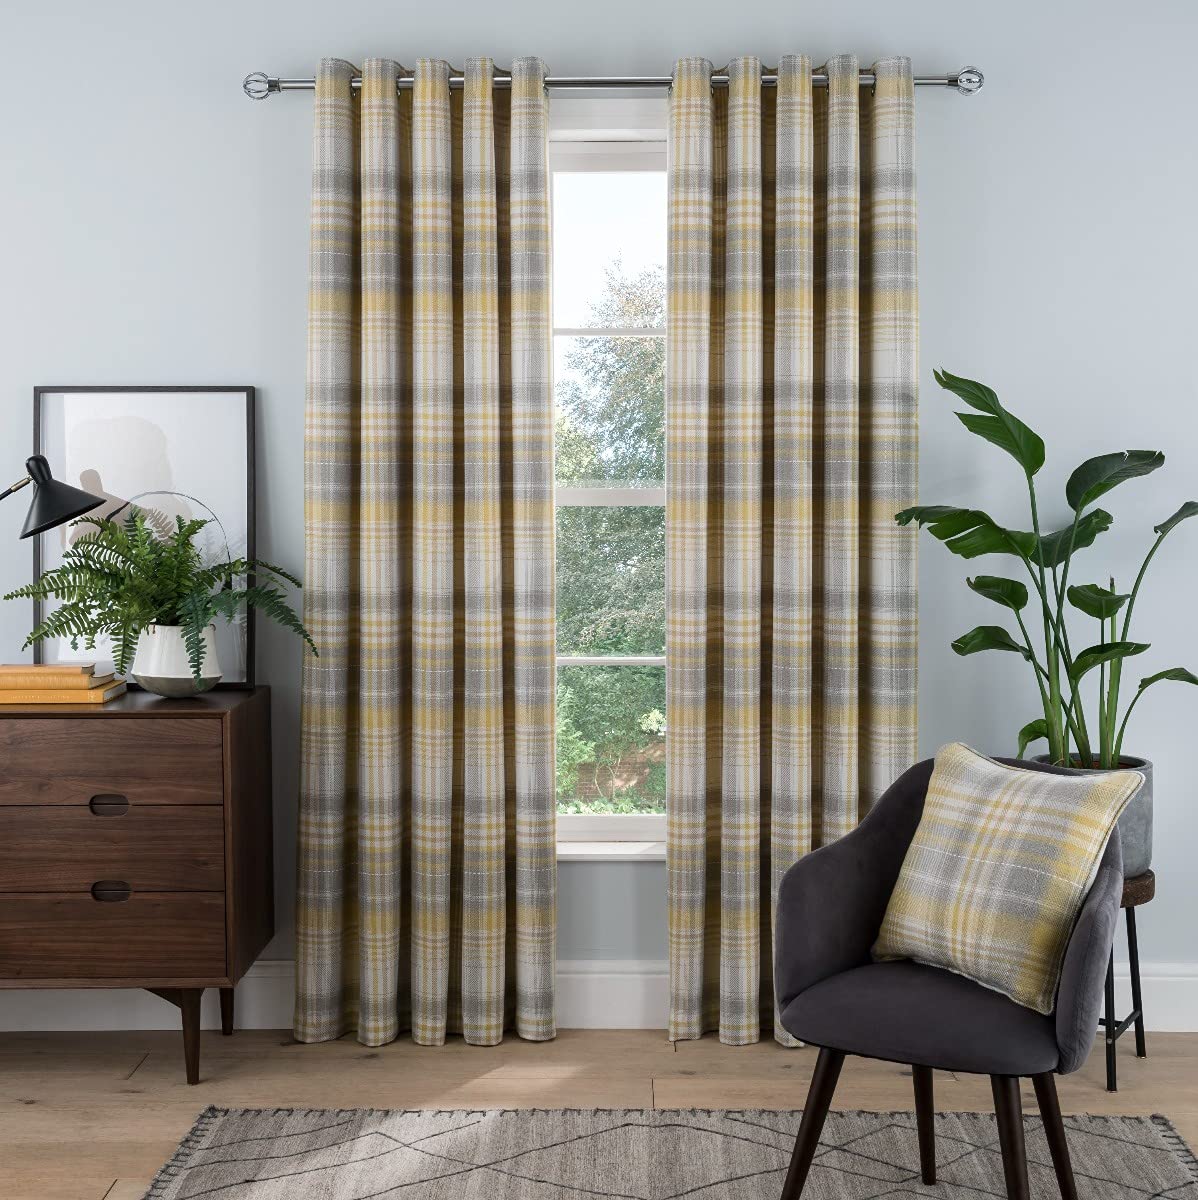 Woven Brushed Check - Eyelet Lined Curtains